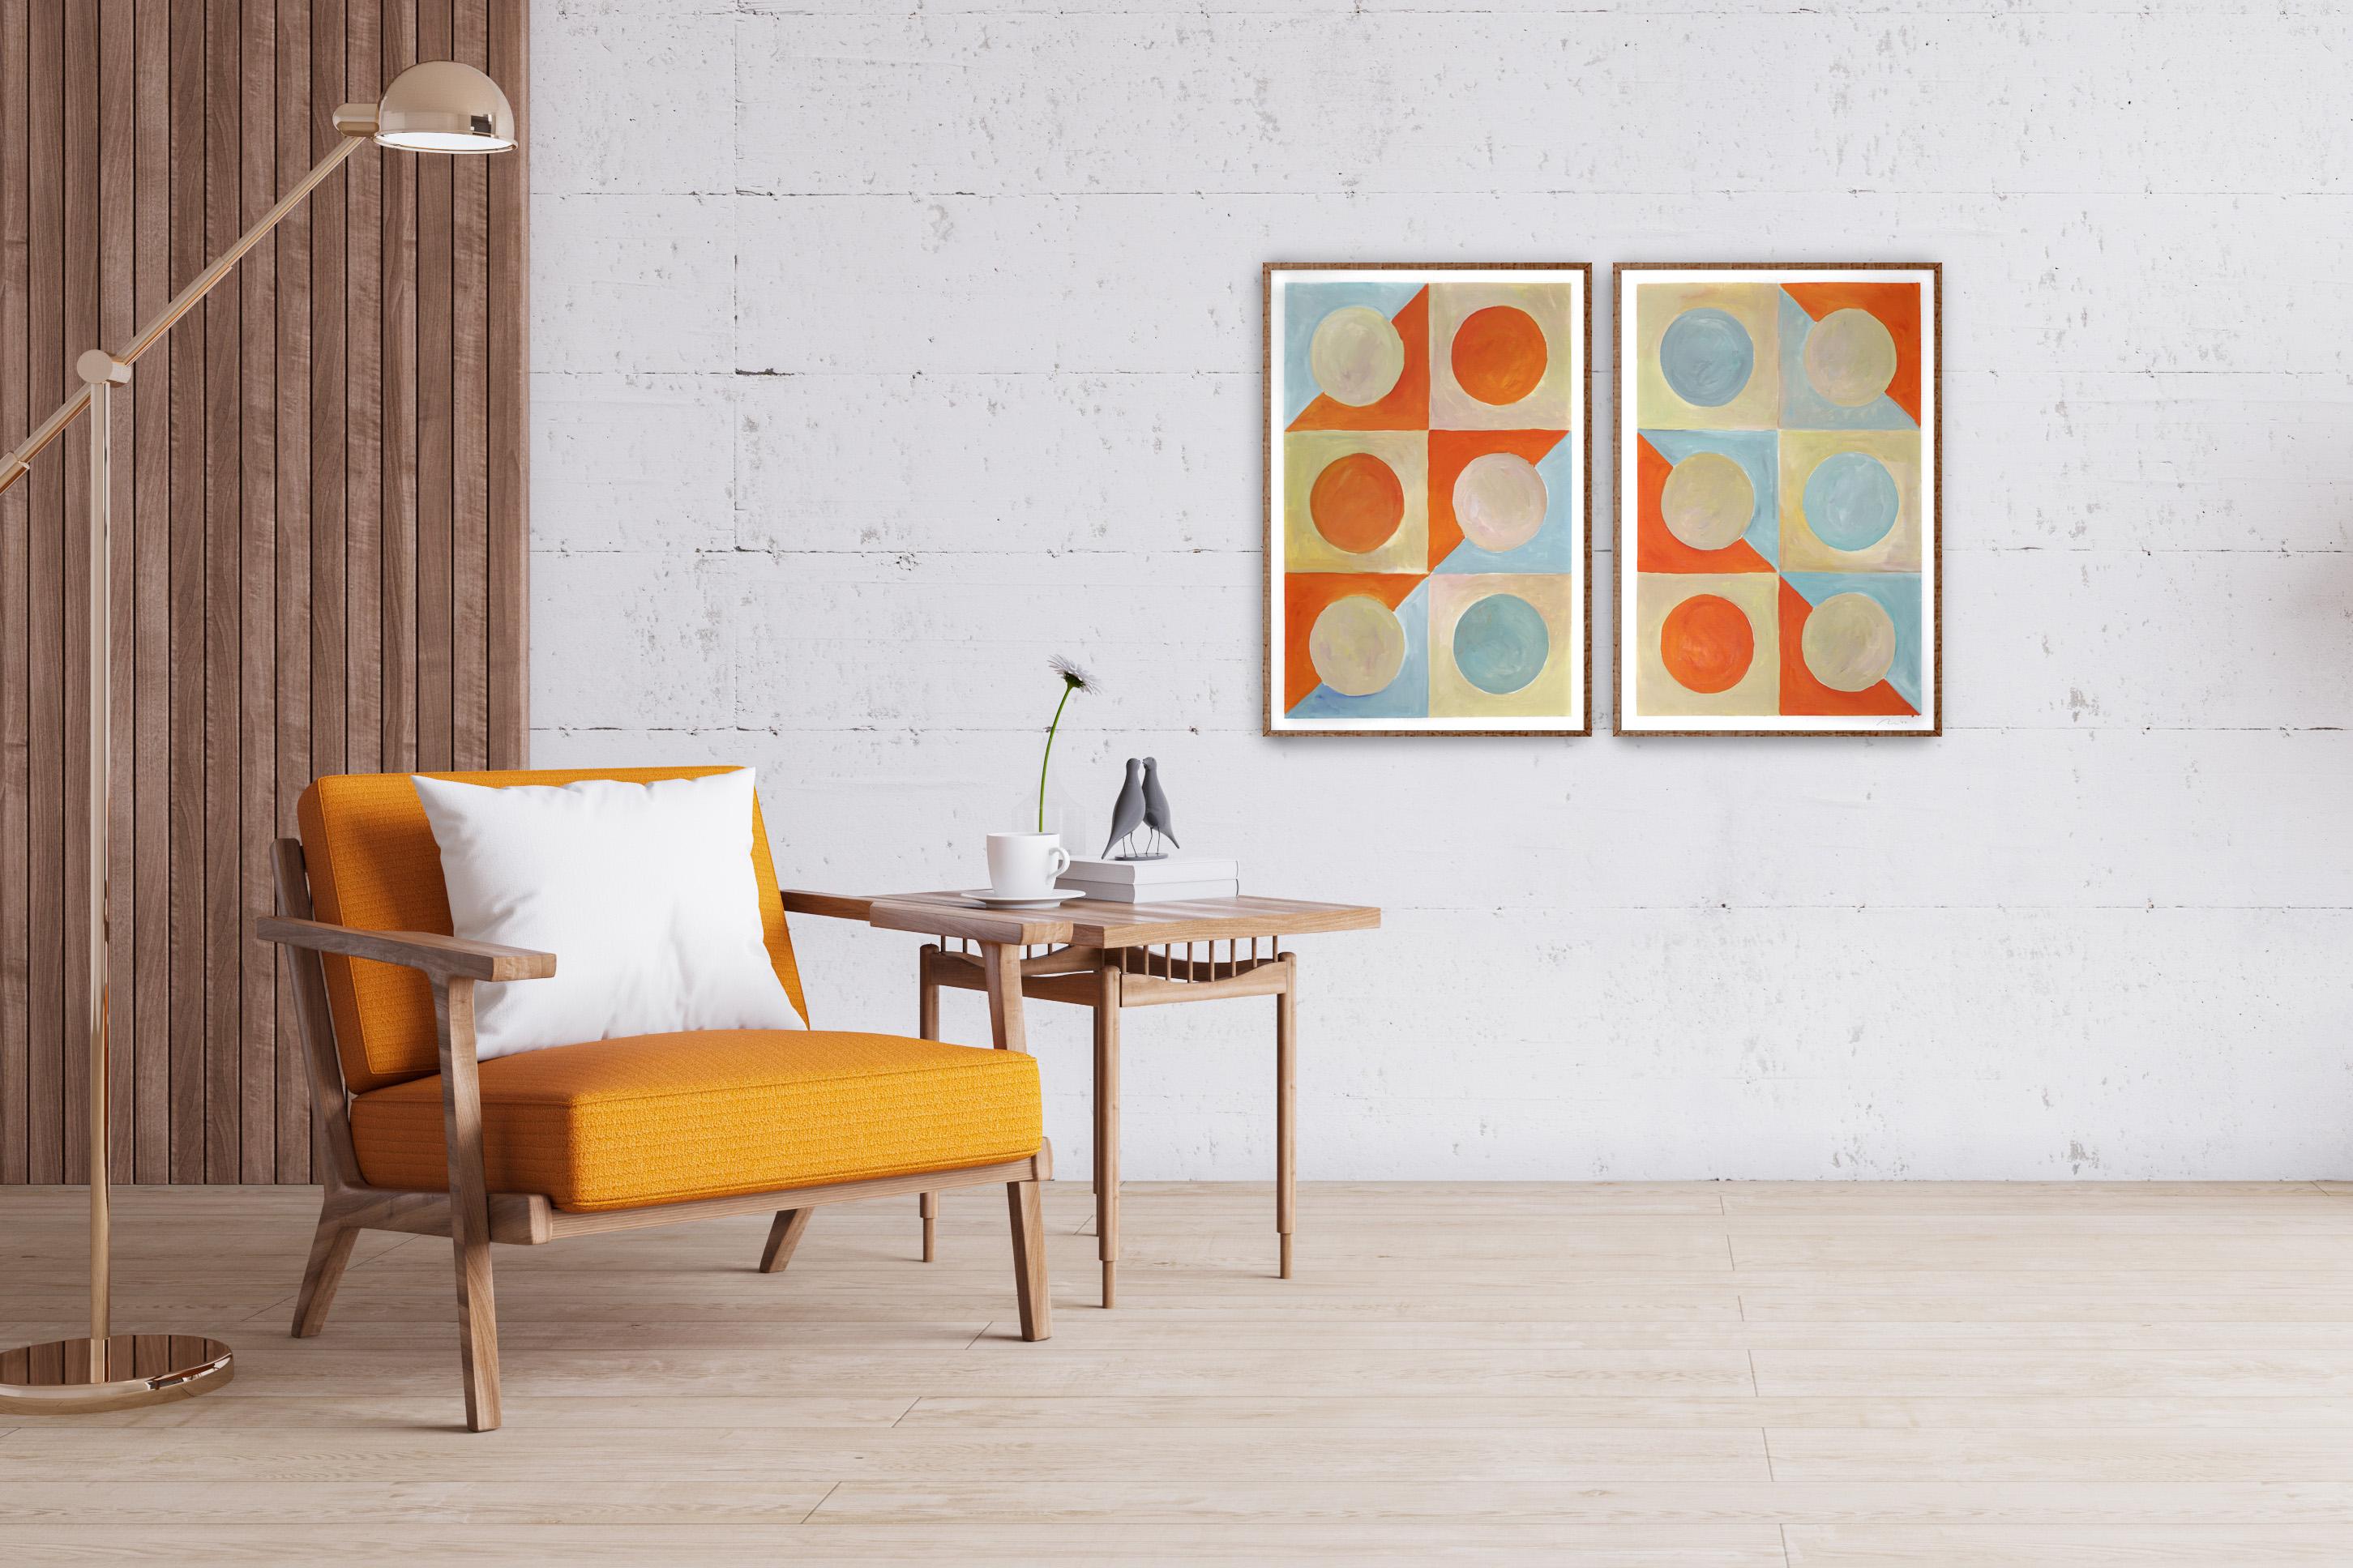 Yin Yang Golden Pattern Tiles, Orange and Turquoise Bauhaus Shapes Diptych, 2022 - Painting by Natalia Roman